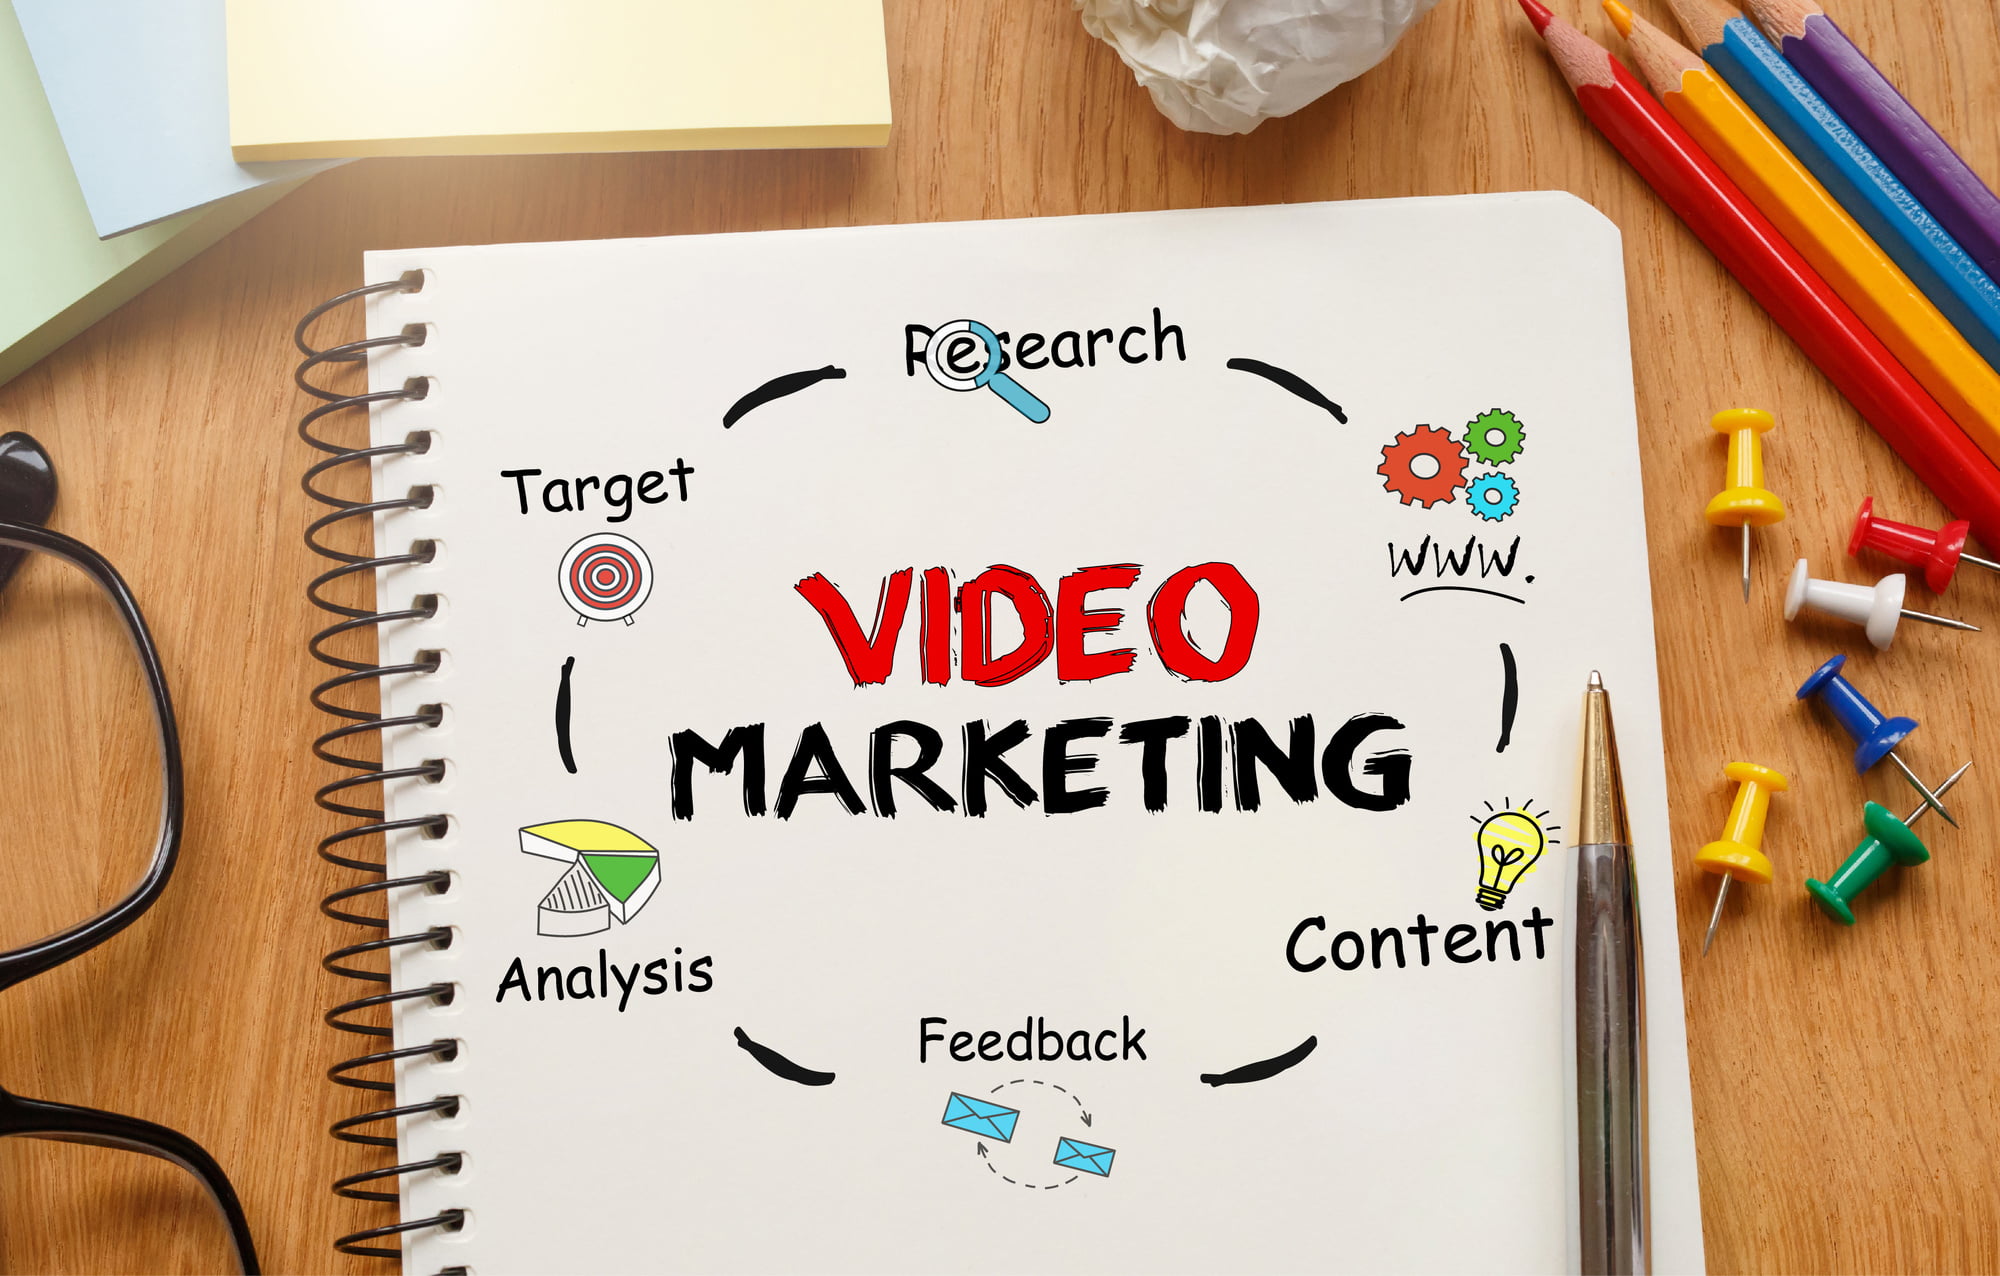 If a picture is worth a thousand words a video is worth a million. Find out how using videos for marketing will accelerate your sales and success.